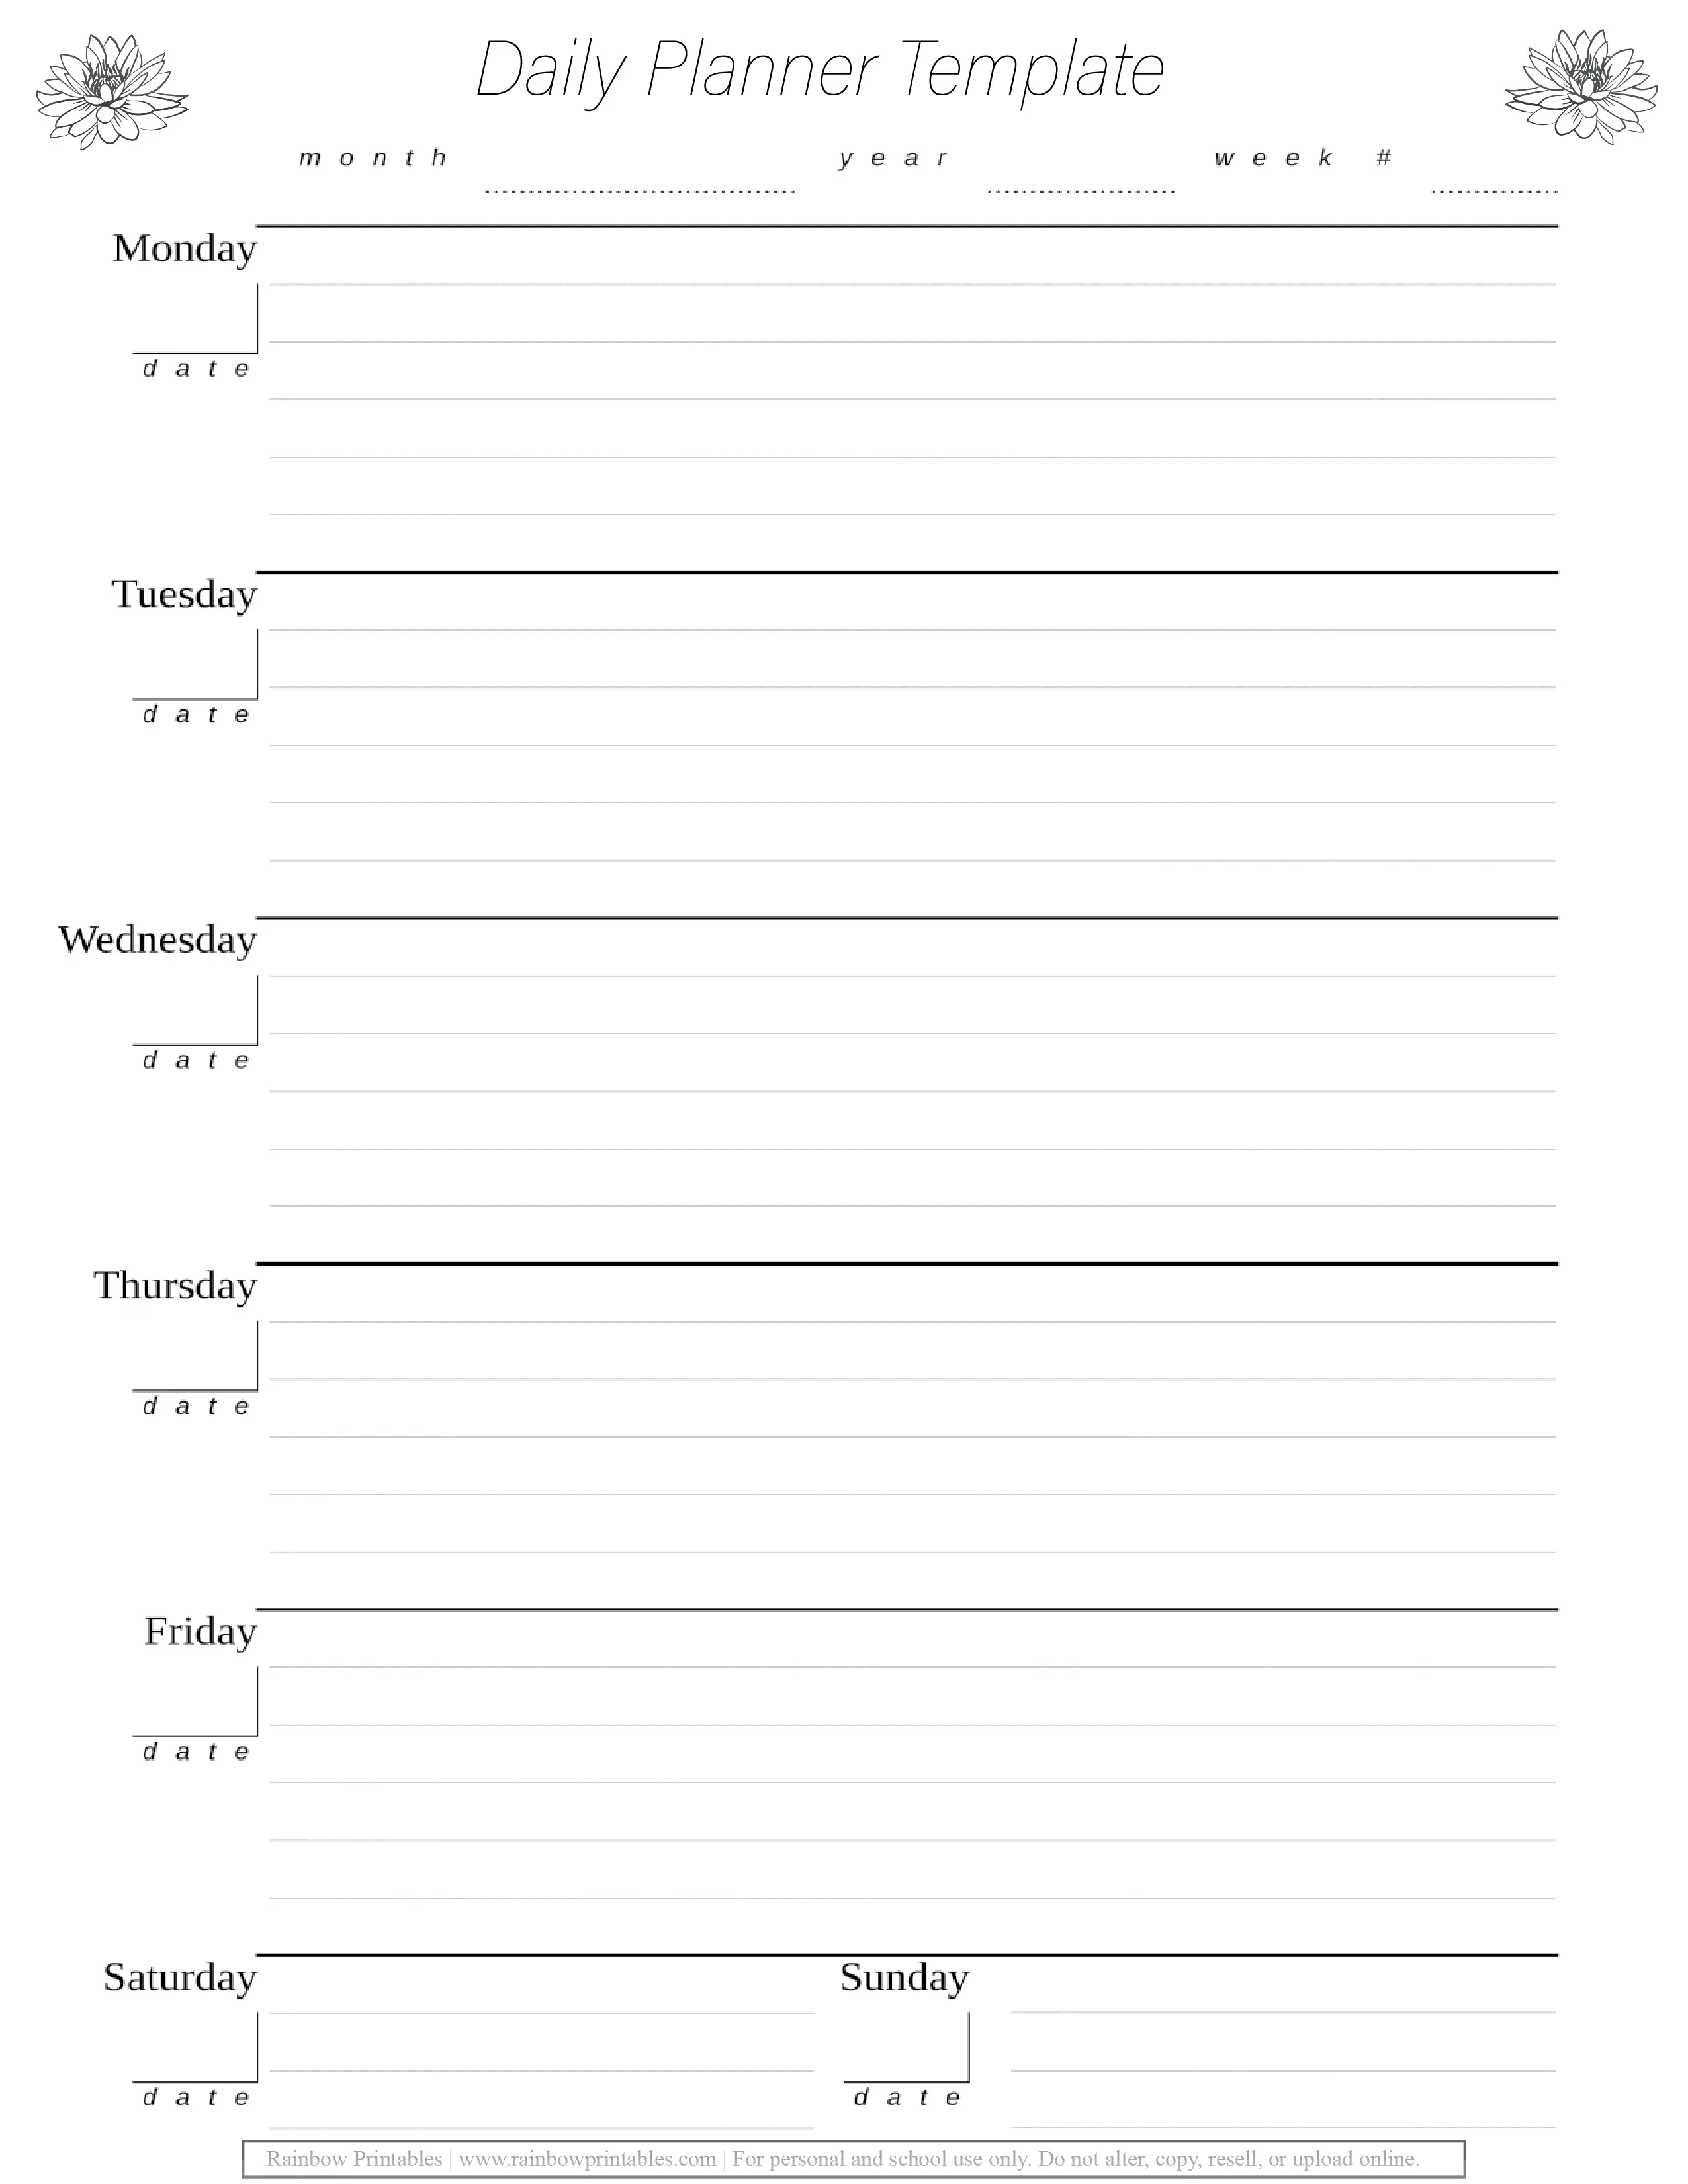 Diary-daily planner printable template Free page organization month date year